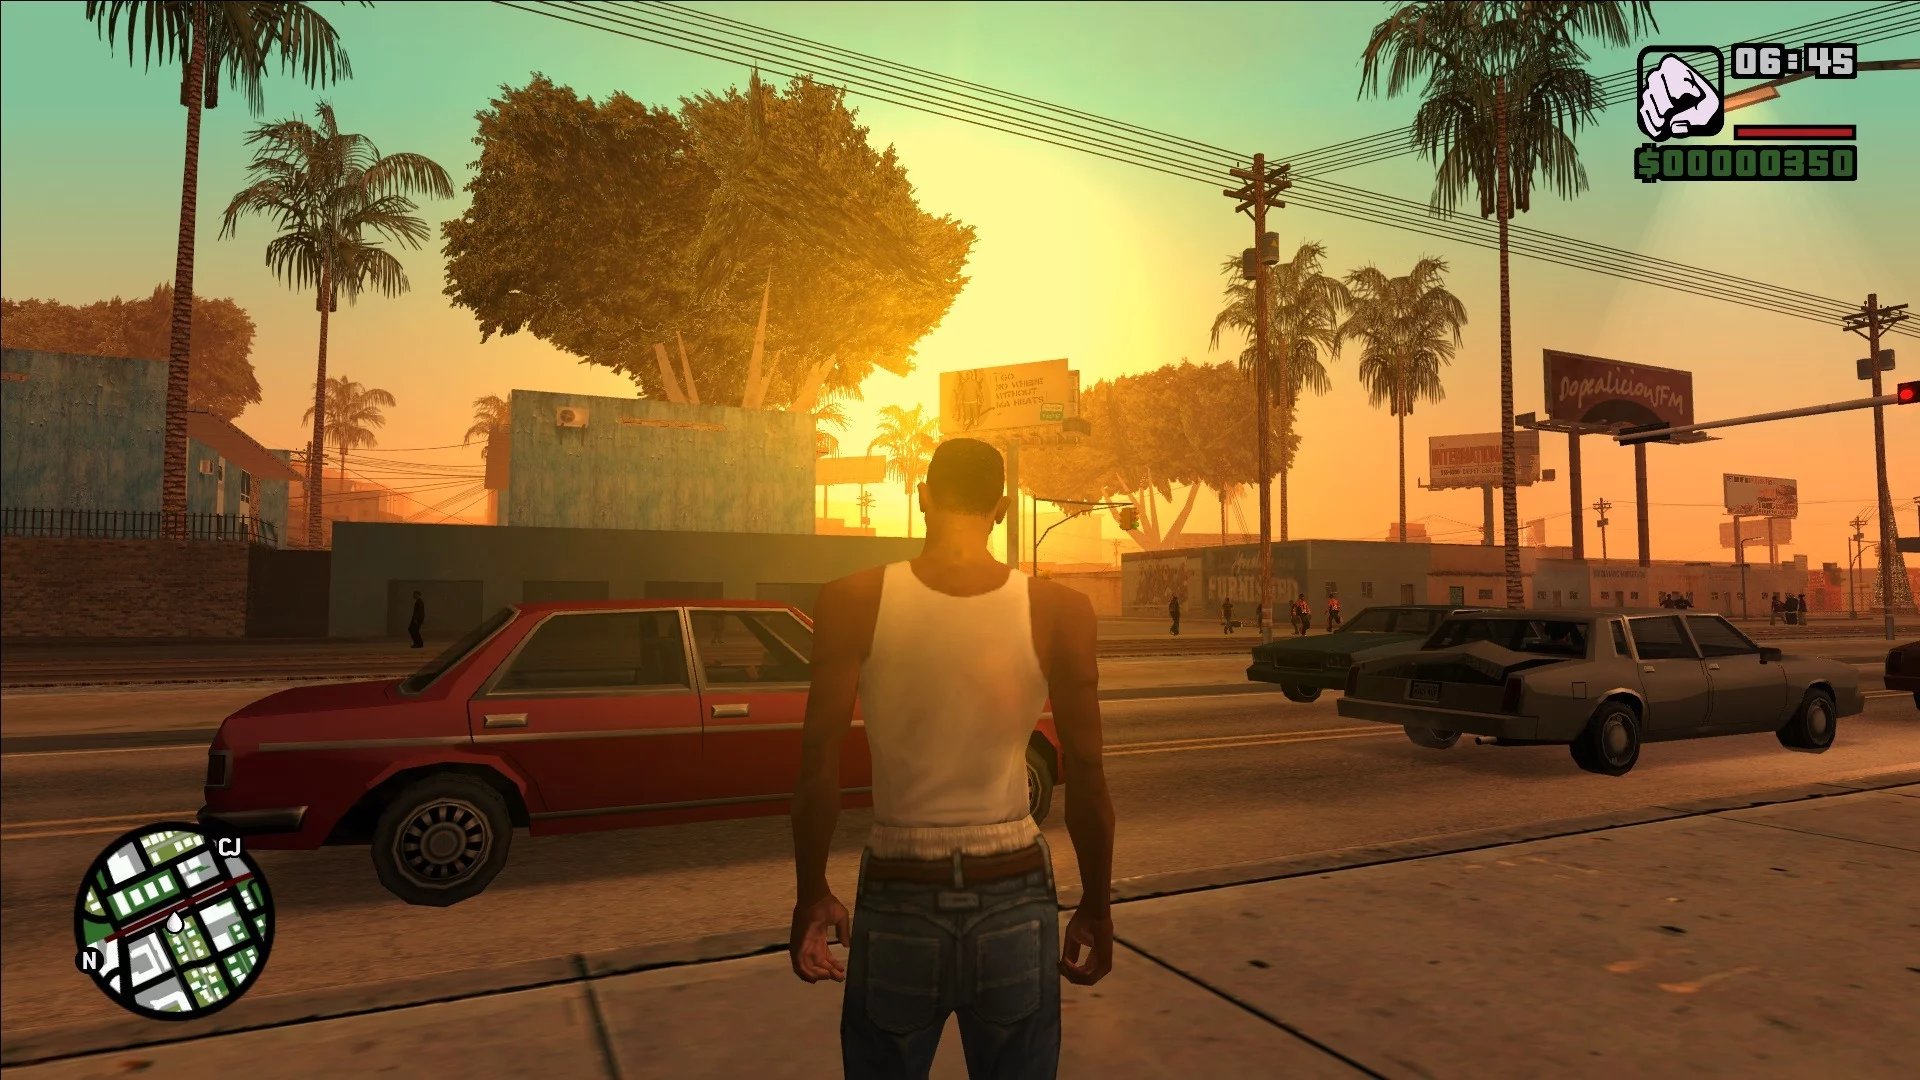 Pete Wharmby on X: 7. GTA San Andreas - PS2. Still the best GTA game in  terms of sheer joy to play. Aged badly, graphically, but such an endless  source of fun.